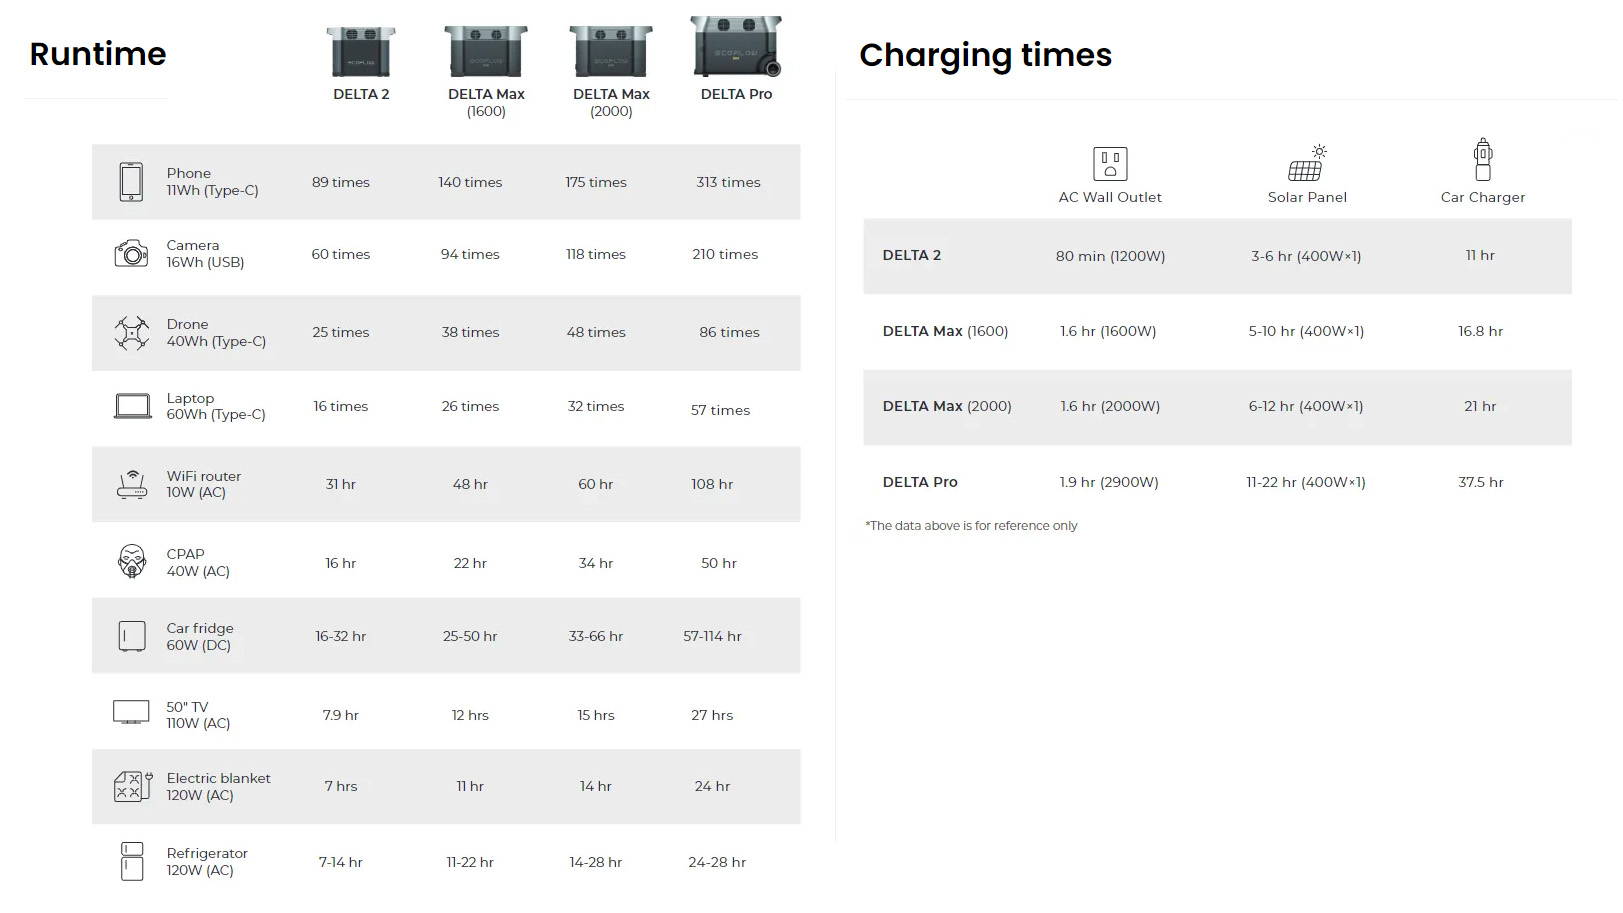 The Runtime and Charging Times of the EcoFlow range. Delta 2, Delta Max, Delta Max 2000 and Delta Pro